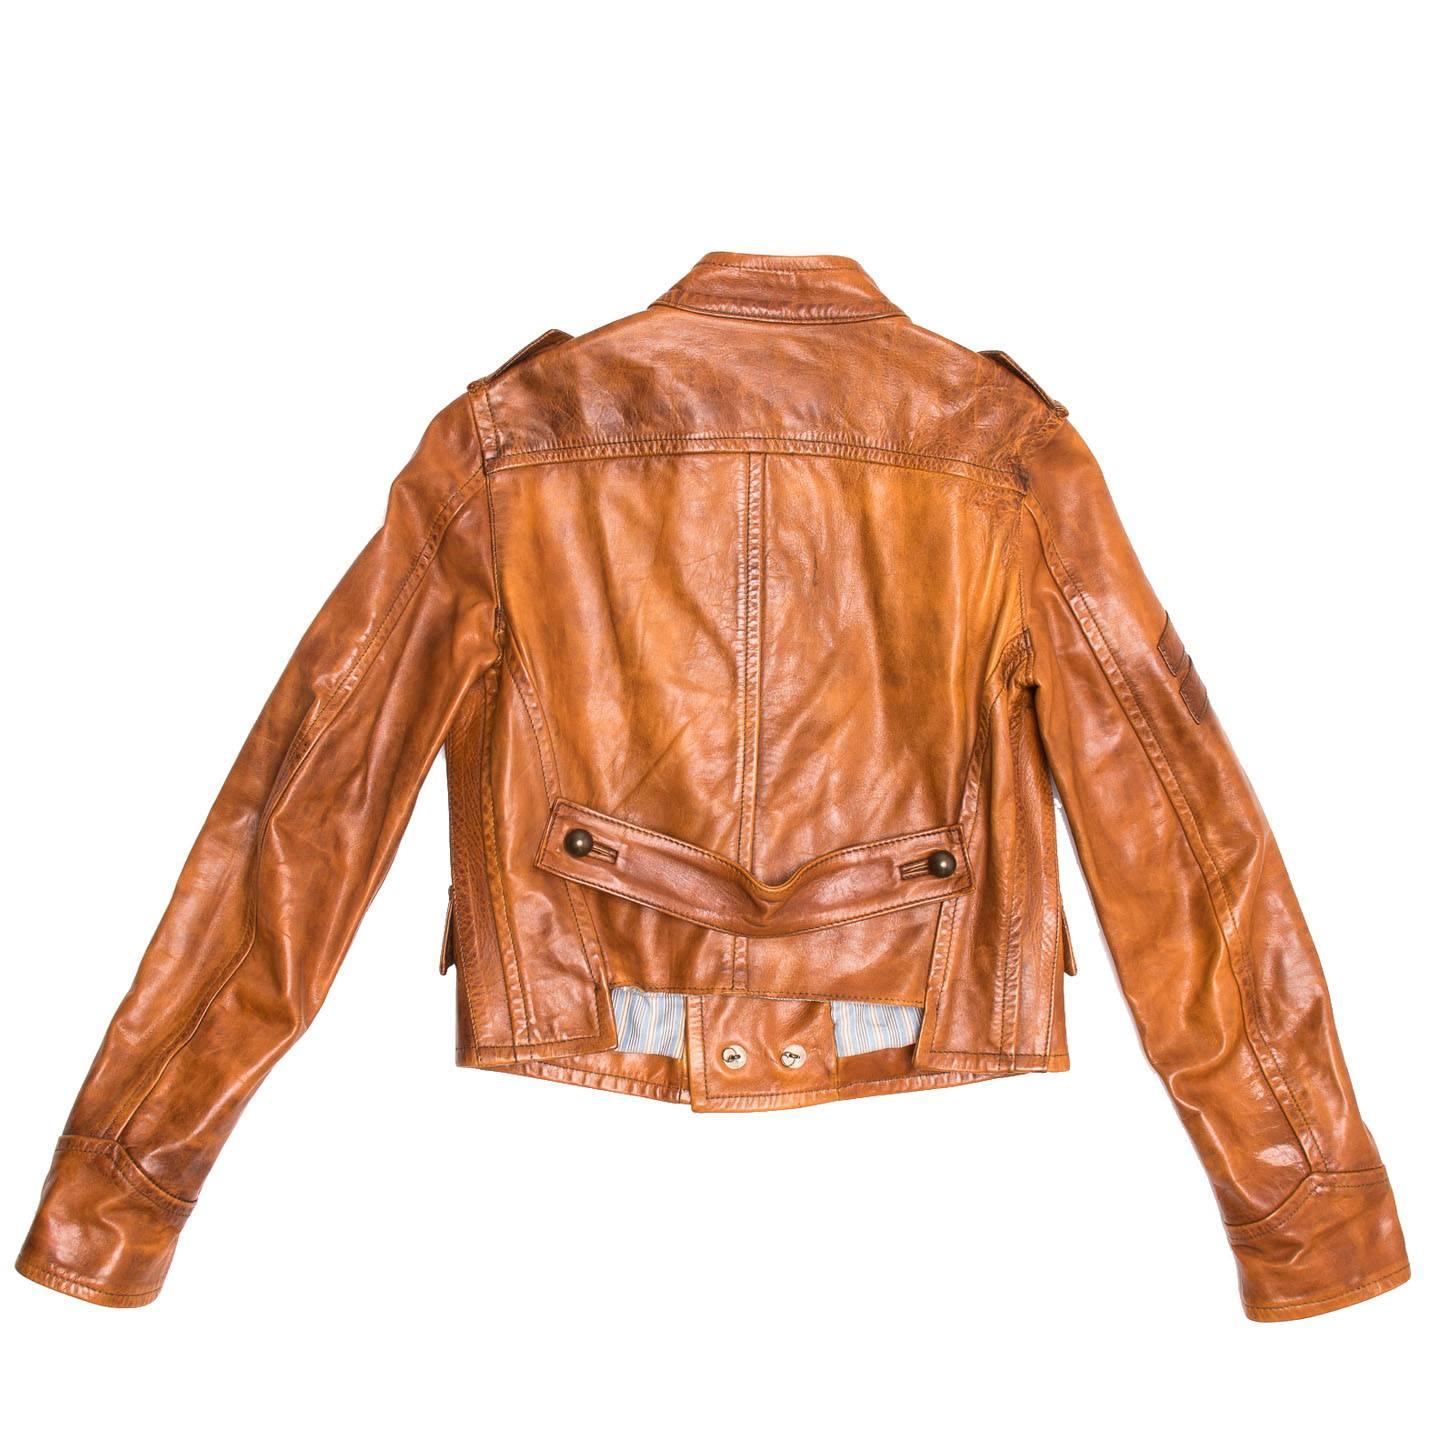 Burnt Sienna leather double breasted jacket with military detailing. Top stitched seams embellish the whole jacket, four shaped pockets flaps and bell dark bronze buttons enrich the front while a back buckle with buttons adorns the waist. The